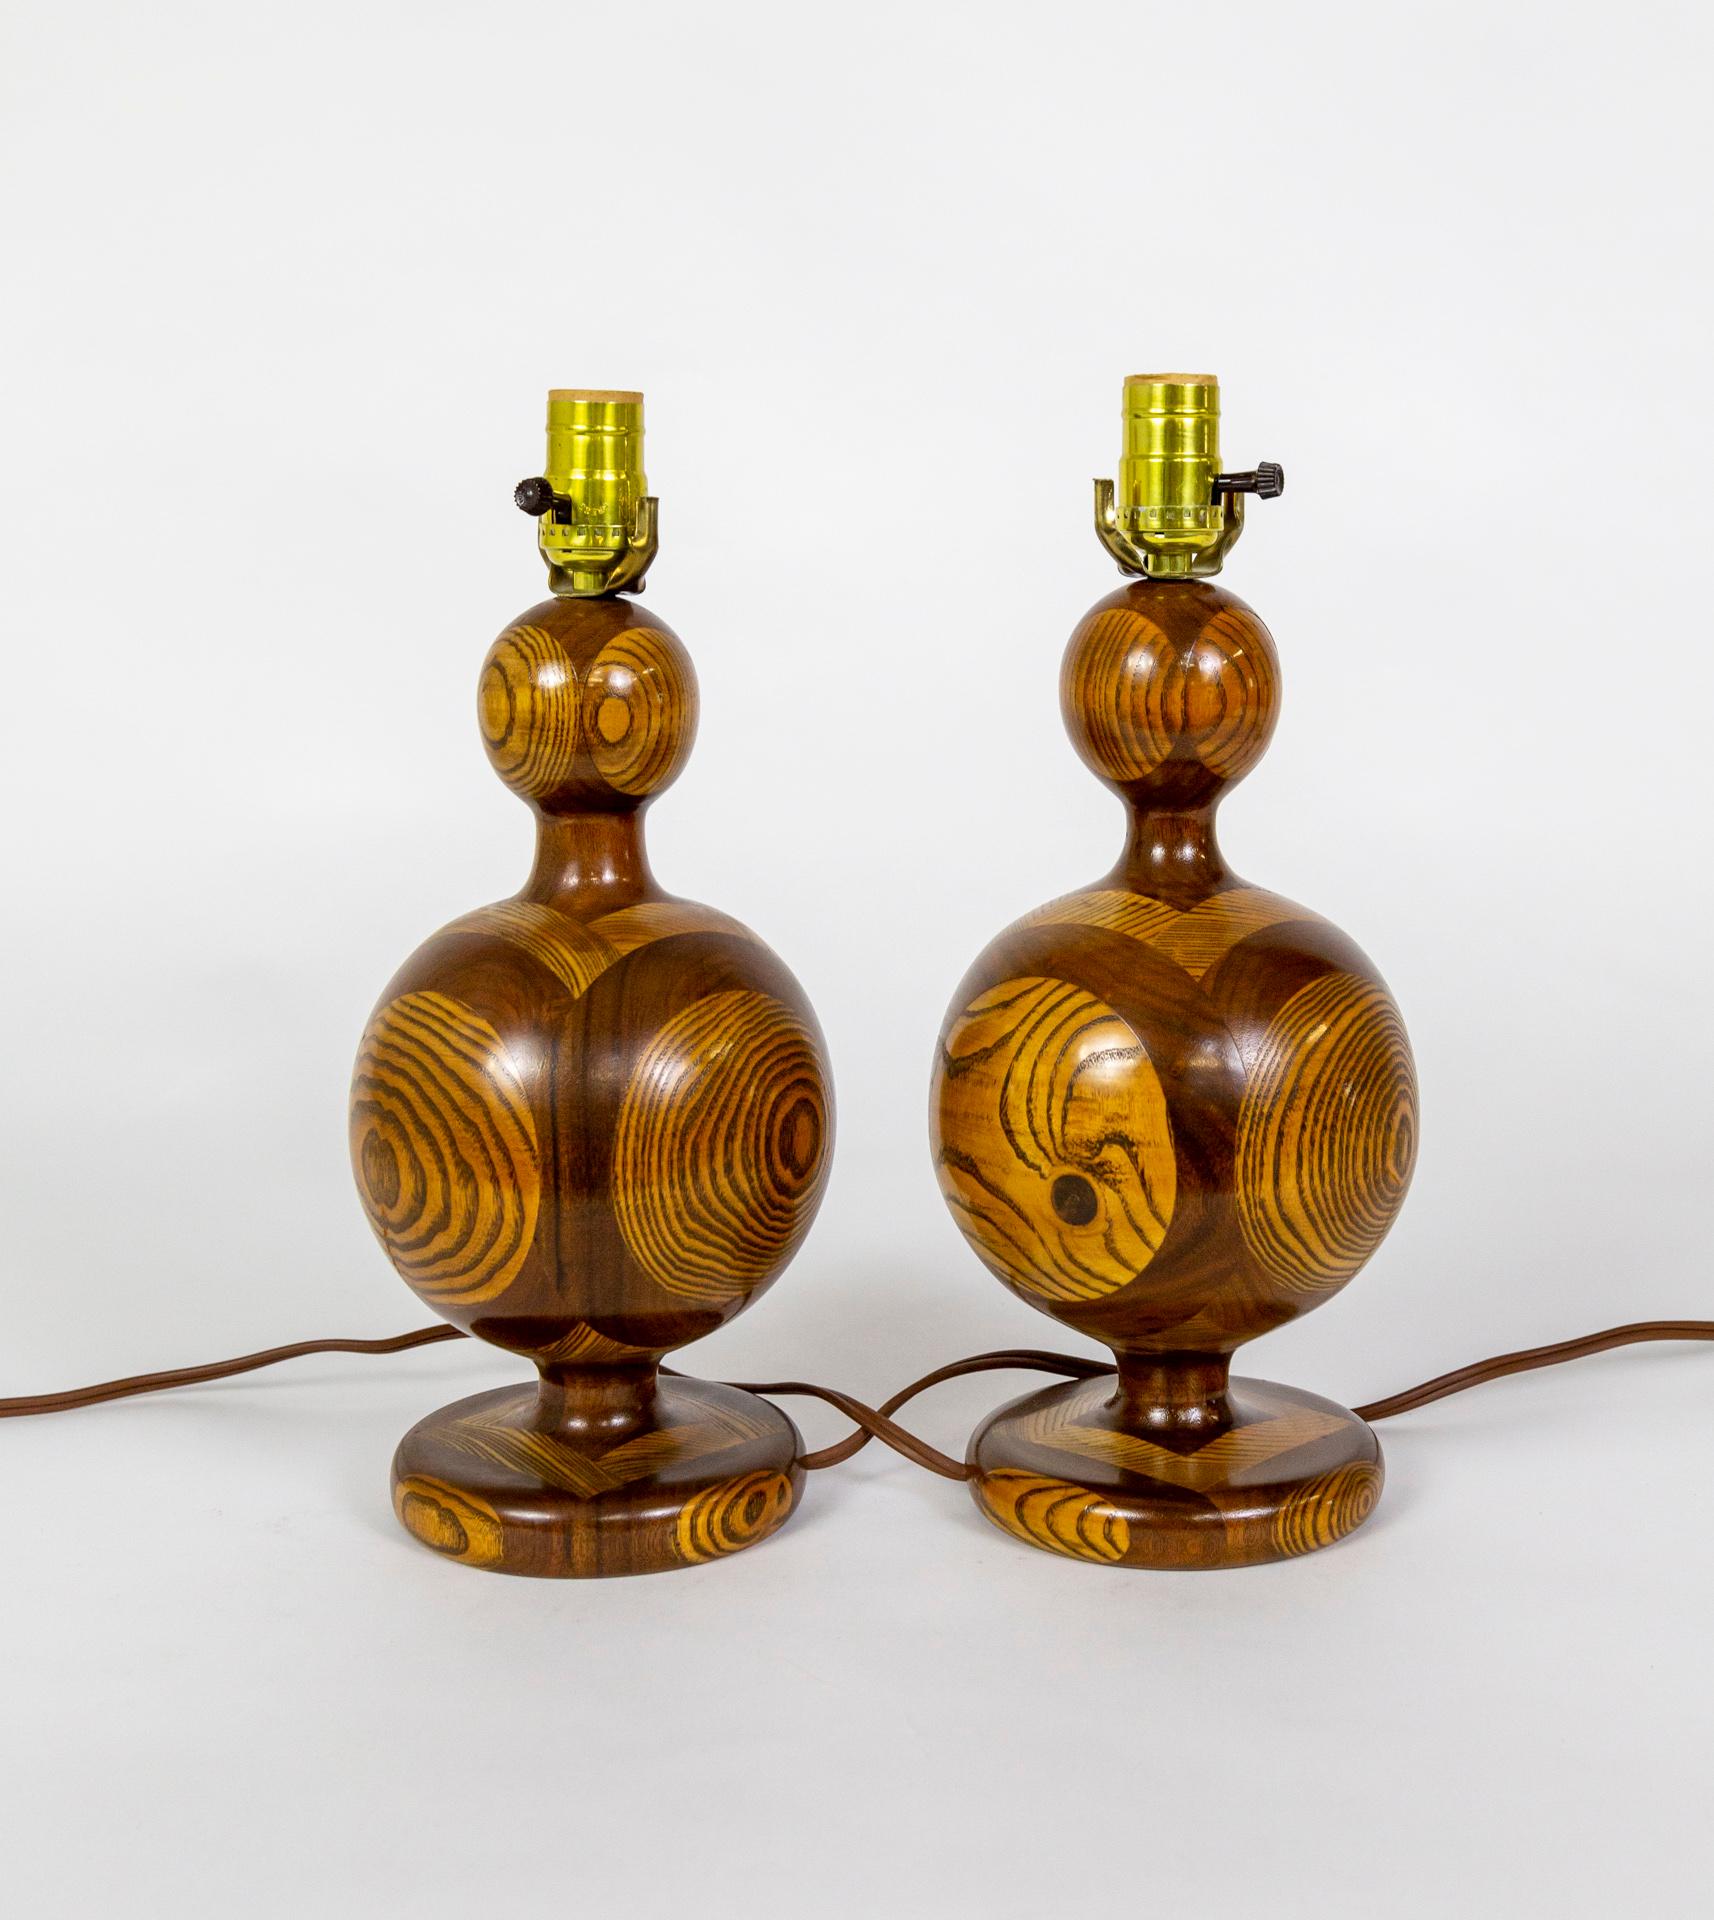 Segmented 'Inlaid-Esque' Turned Walnut/Cherry Wood Lamps, Pair 2